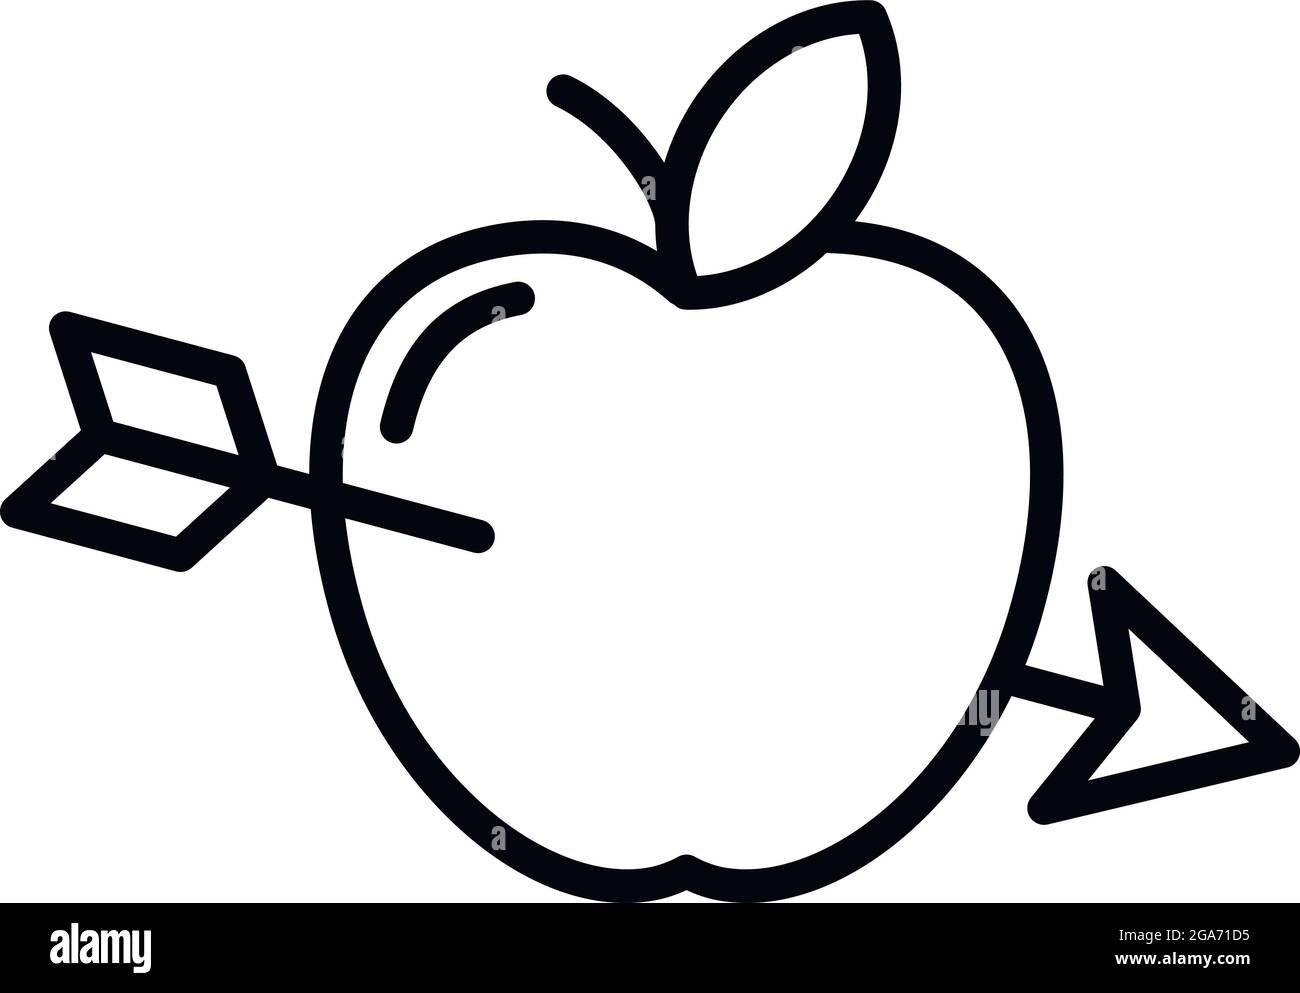 rounded arrow clipart black and white apple